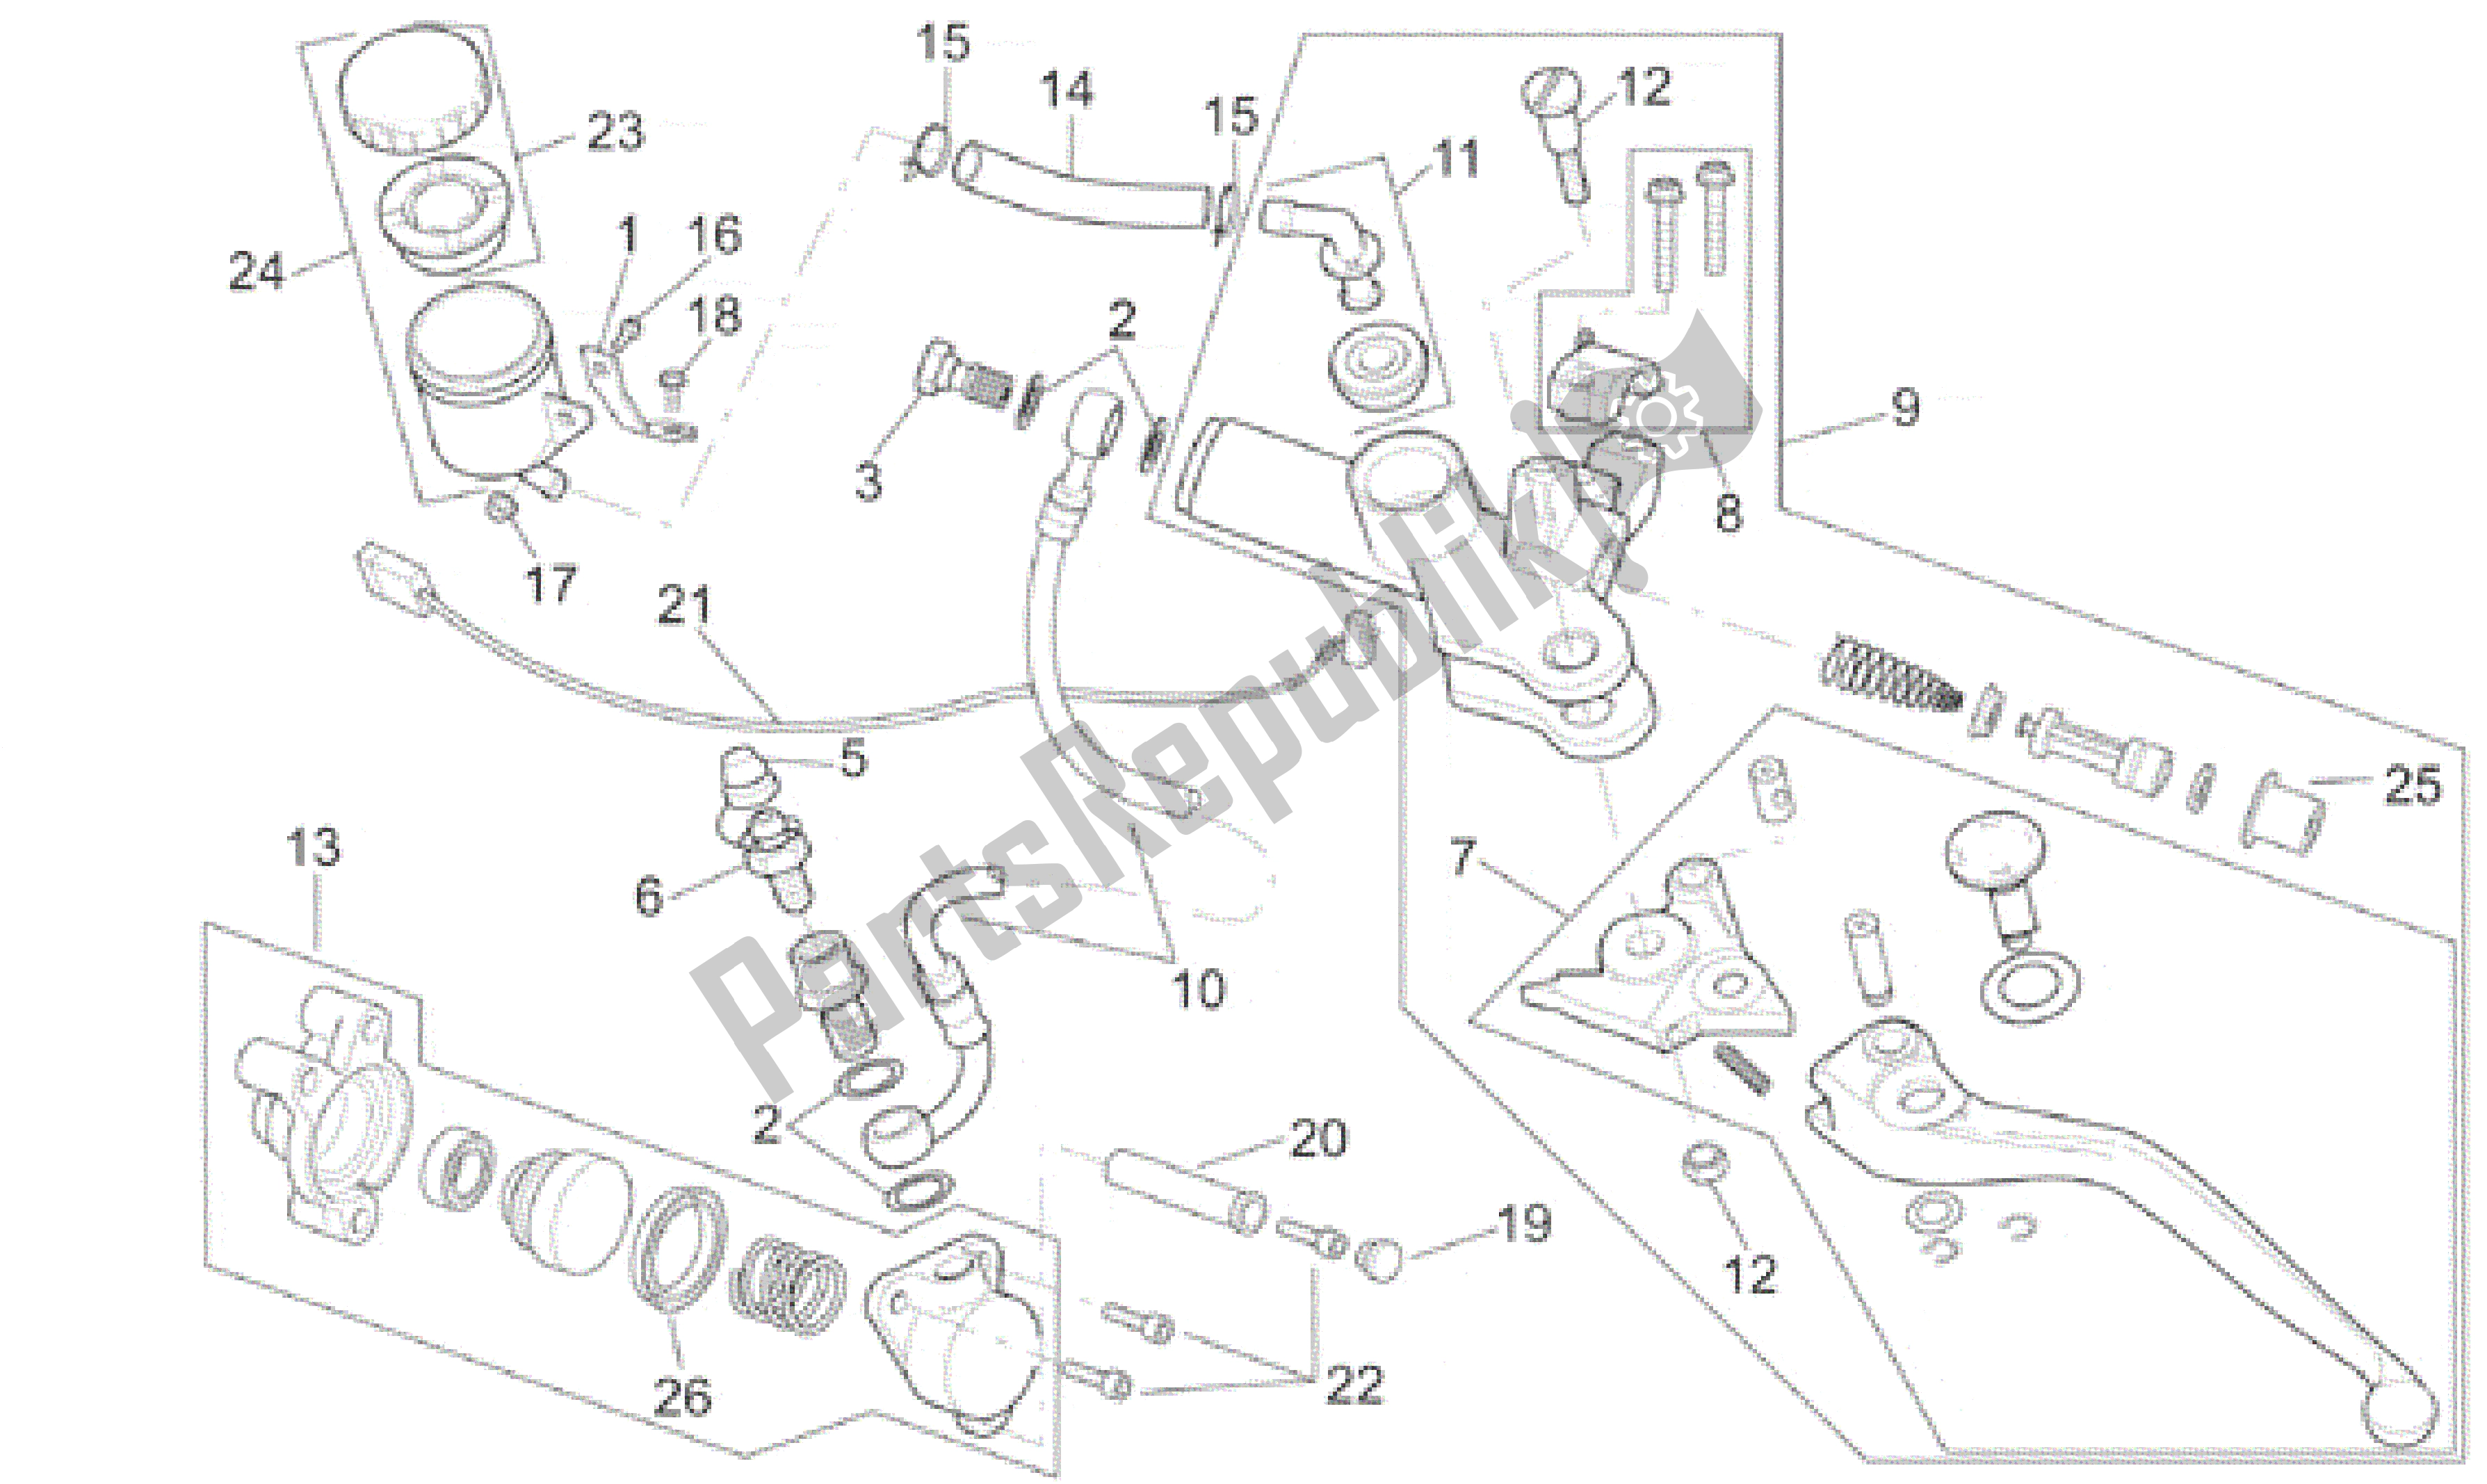 All parts for the Clutch Pump of the Aprilia RSV Mille R 3901 1000 2001 - 2002